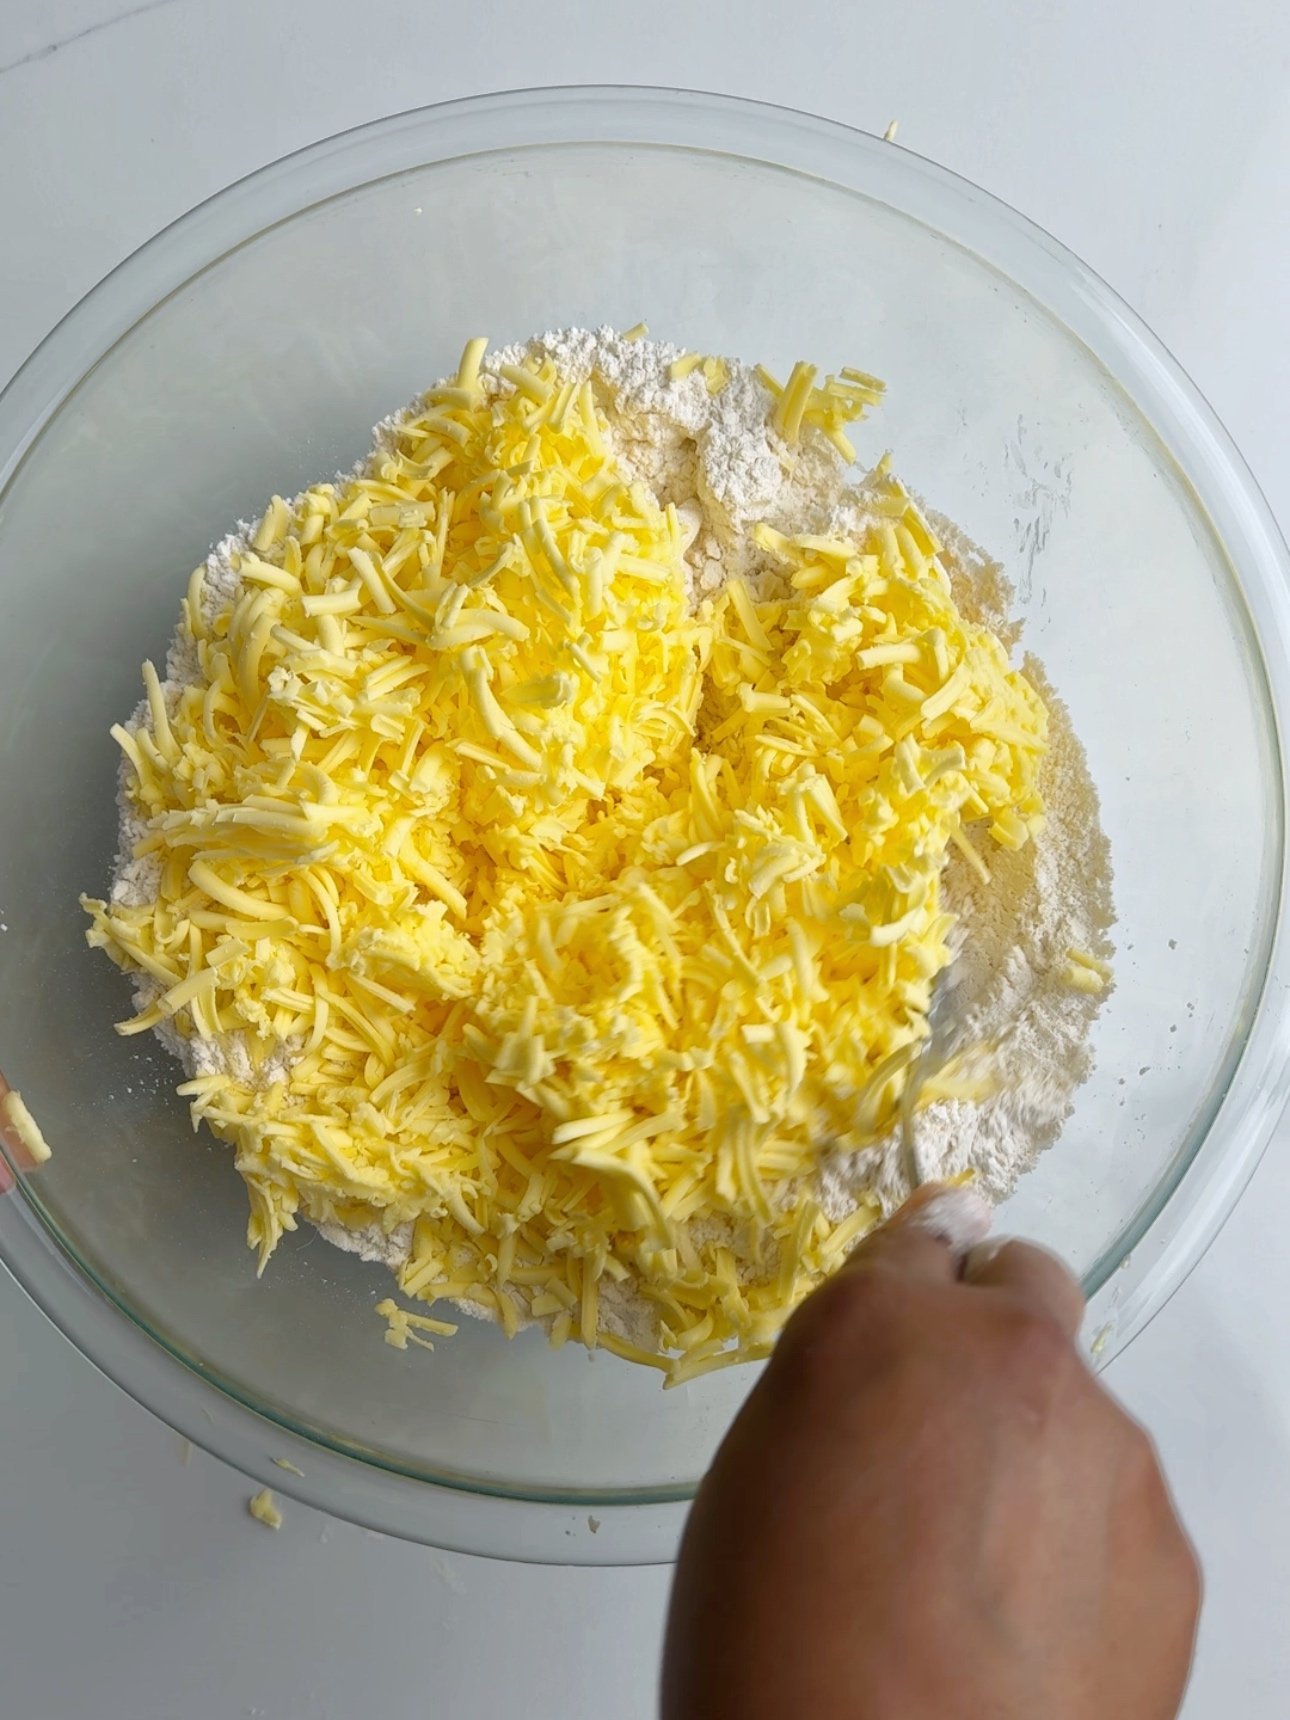 Grated butted and flour in a glass bowl